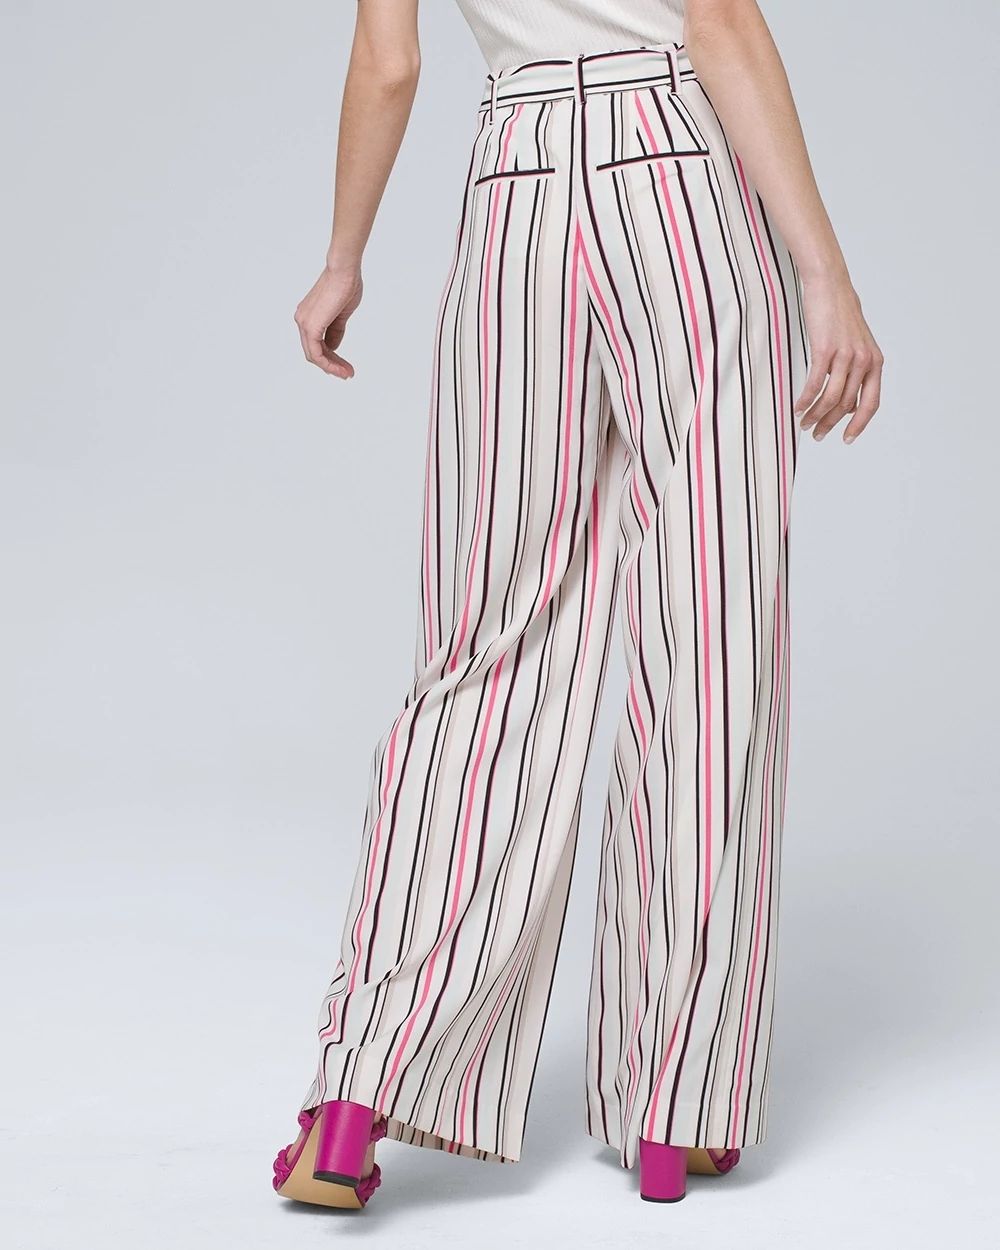 Striped Wide-Leg Side-Zip Pants click to view larger image.